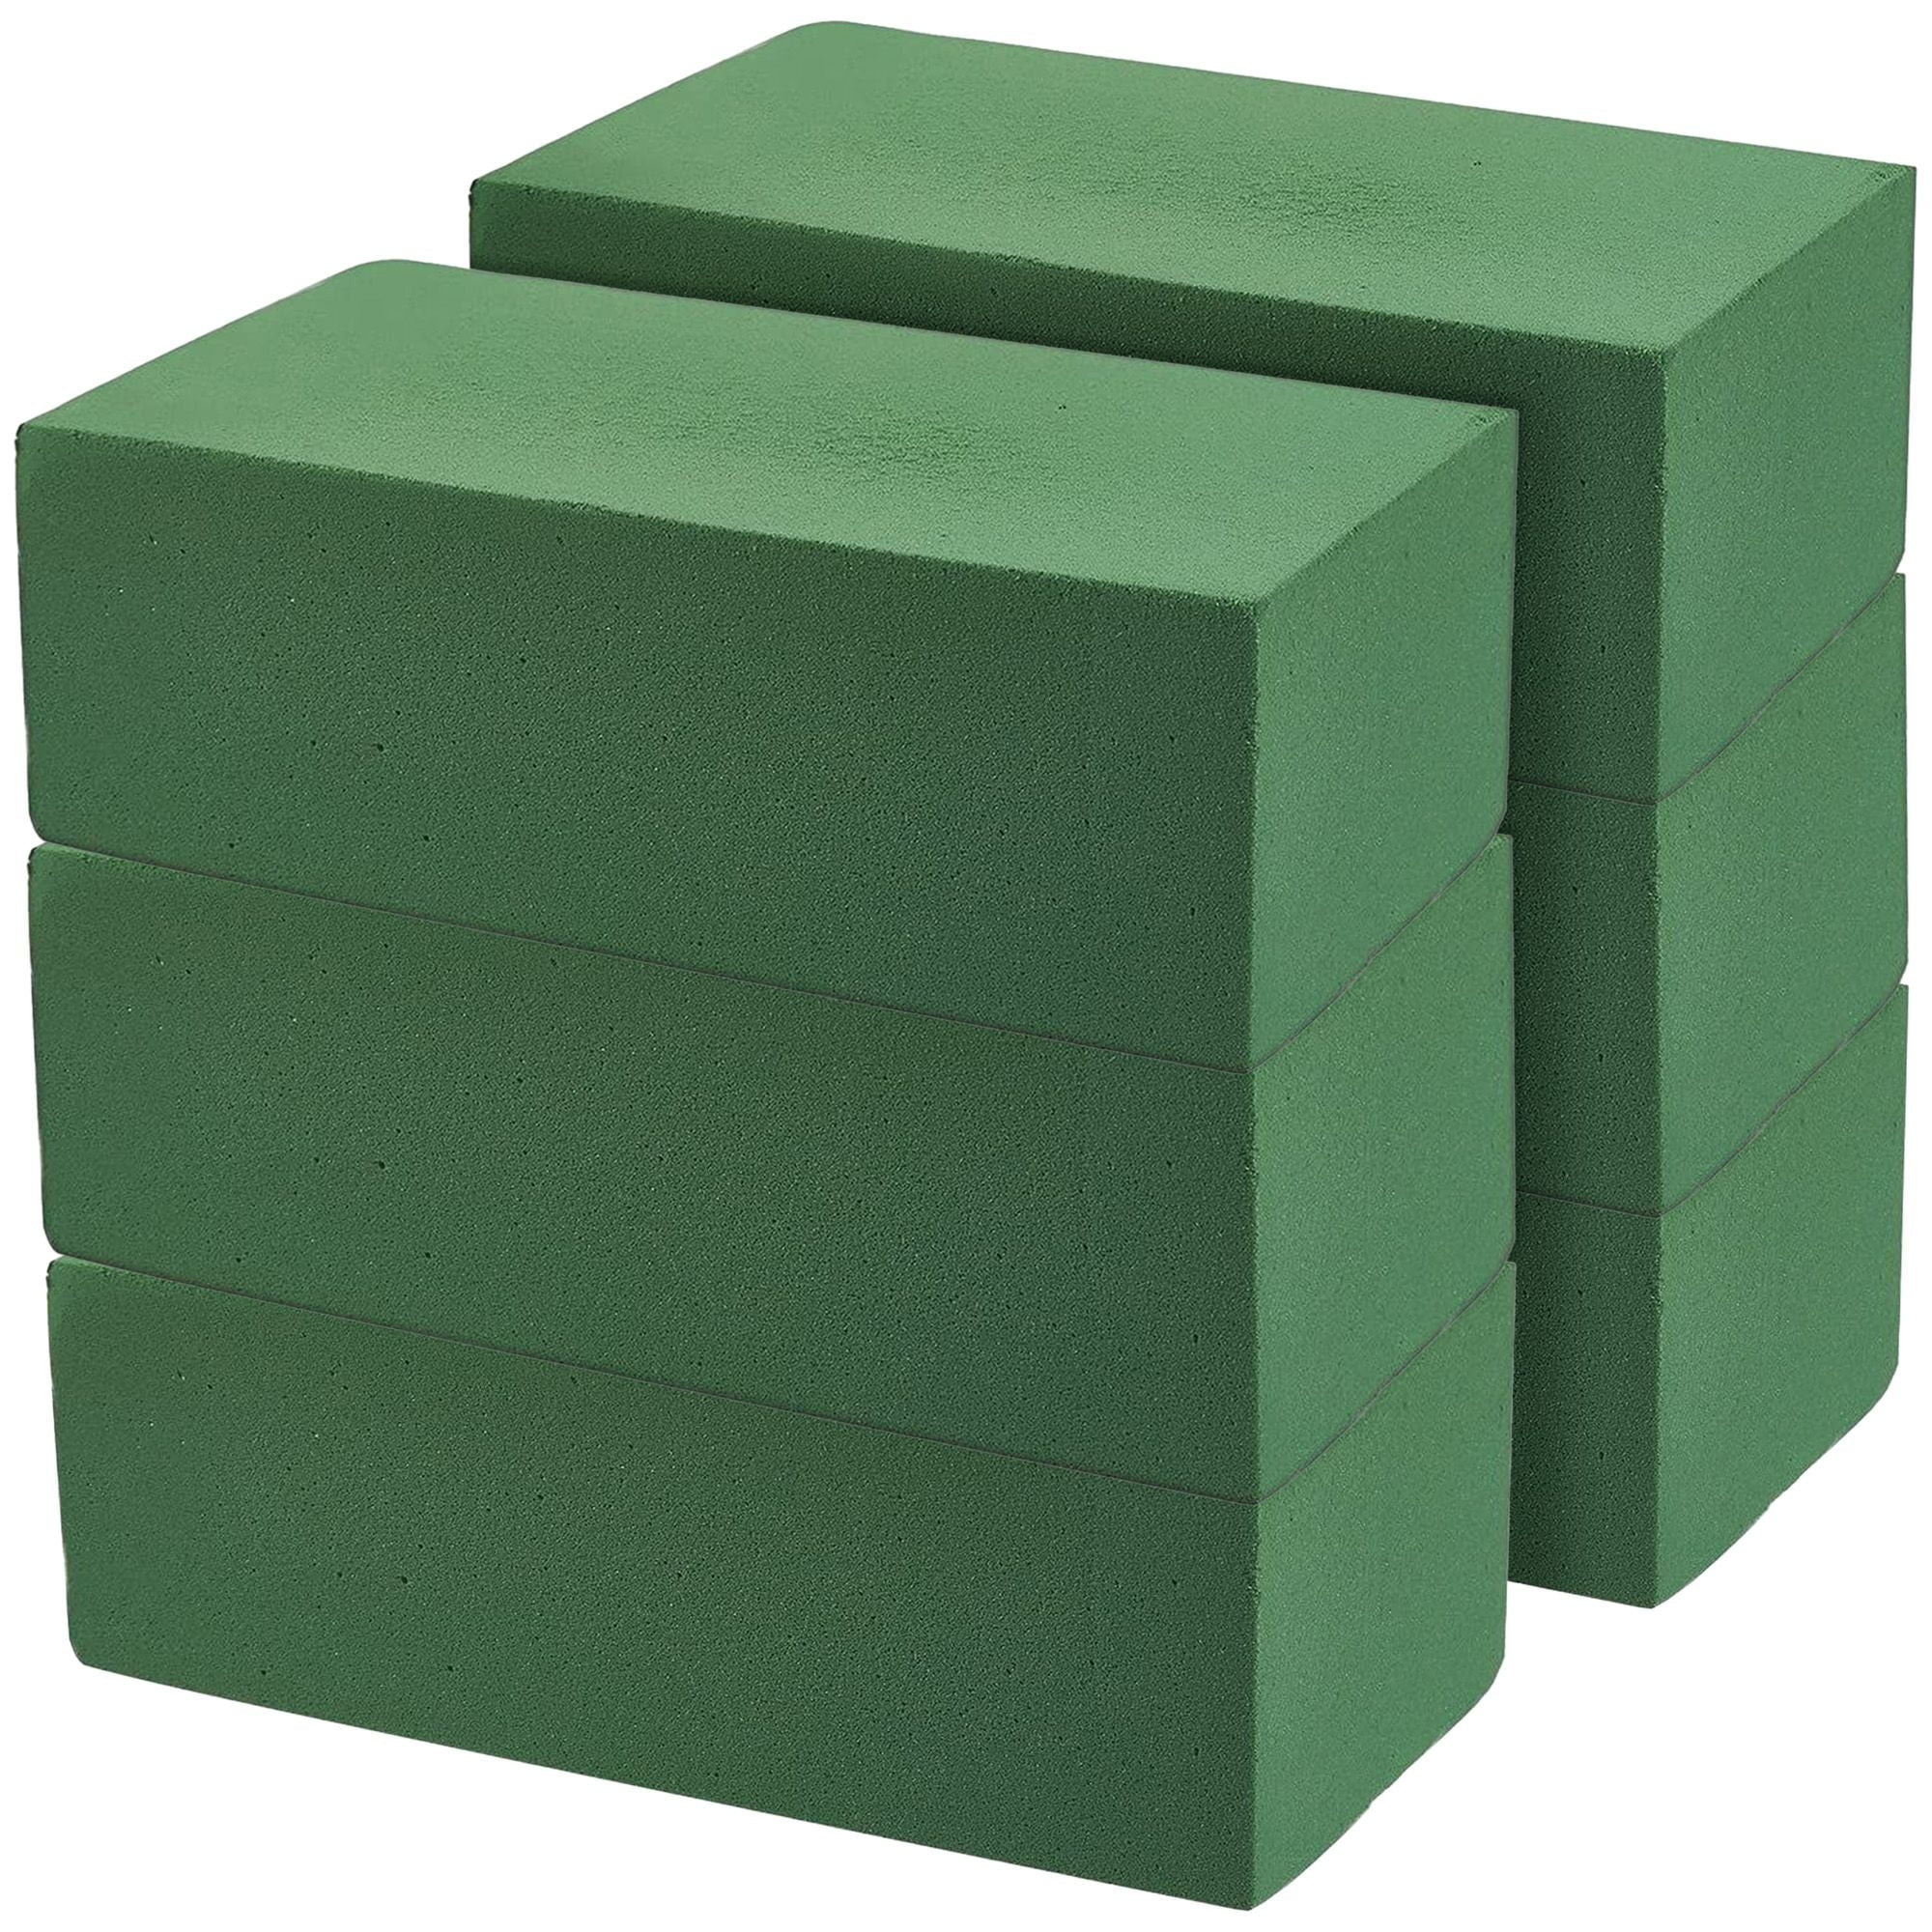 Floral Foam Blocks for Fresh and Artificial Flowers, 6 Pcs Each 8 L x 4 W  x 3 H Wet and Dry Green Florist Foam for Weddings, Birthday Parties and